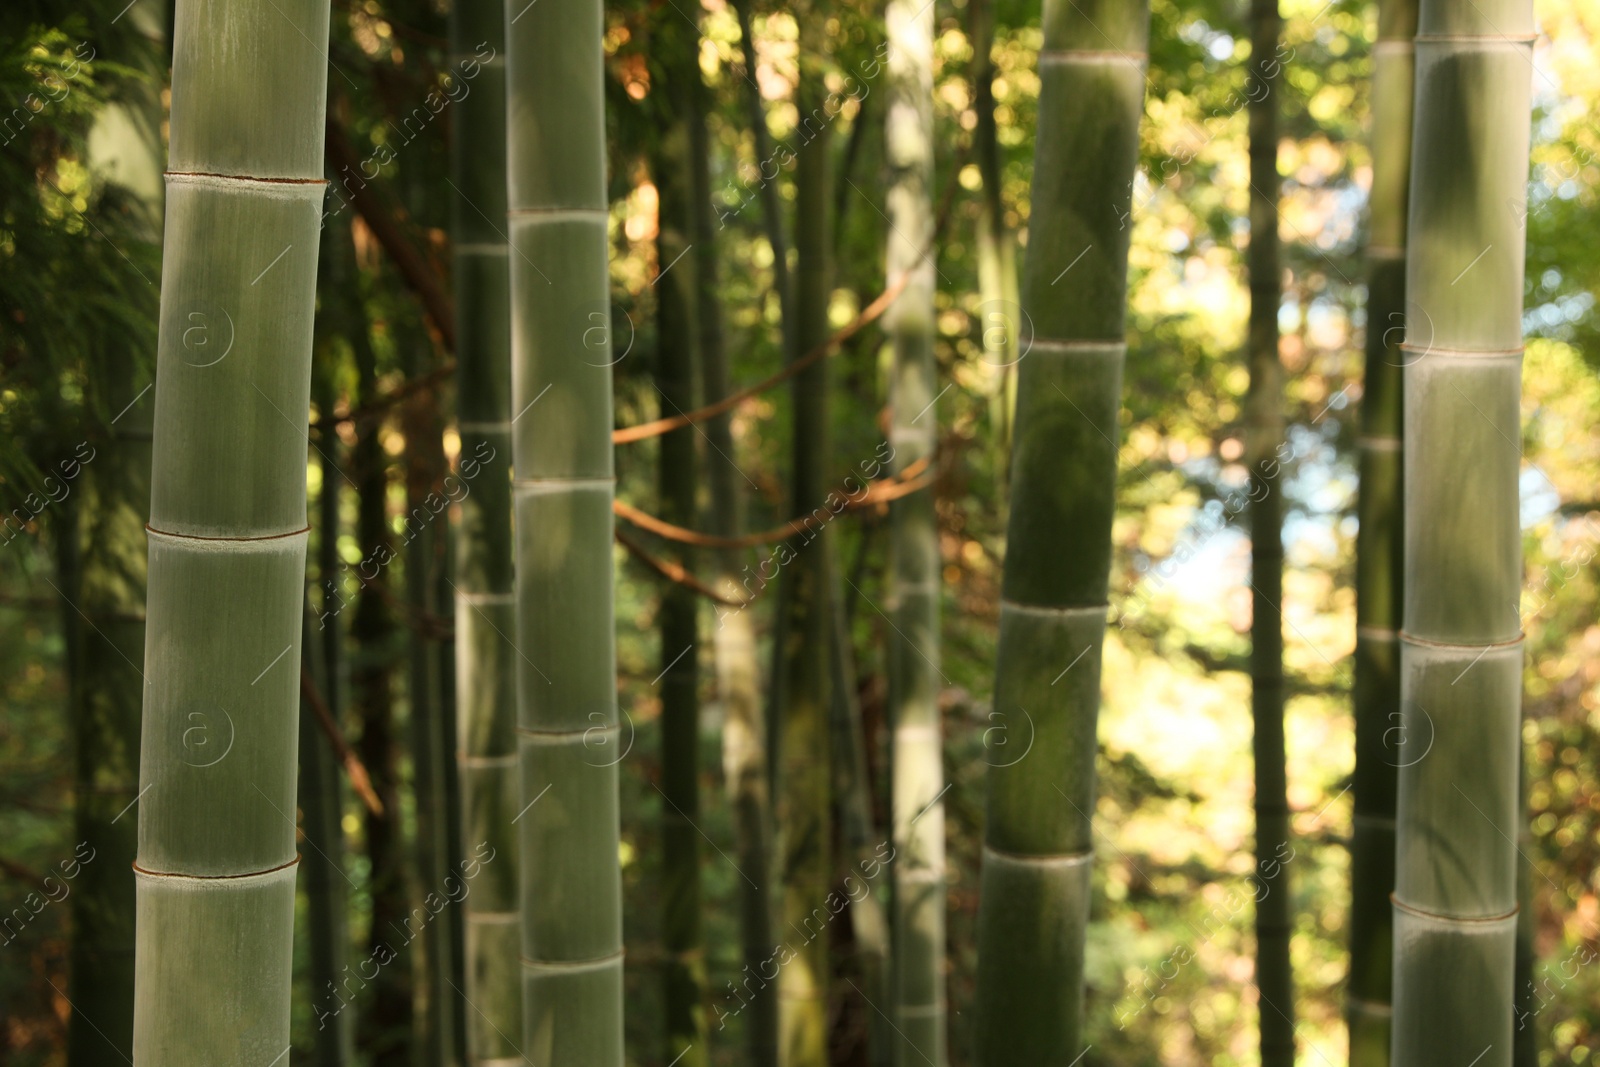 Photo of Beautiful green bamboo plants growing in forest